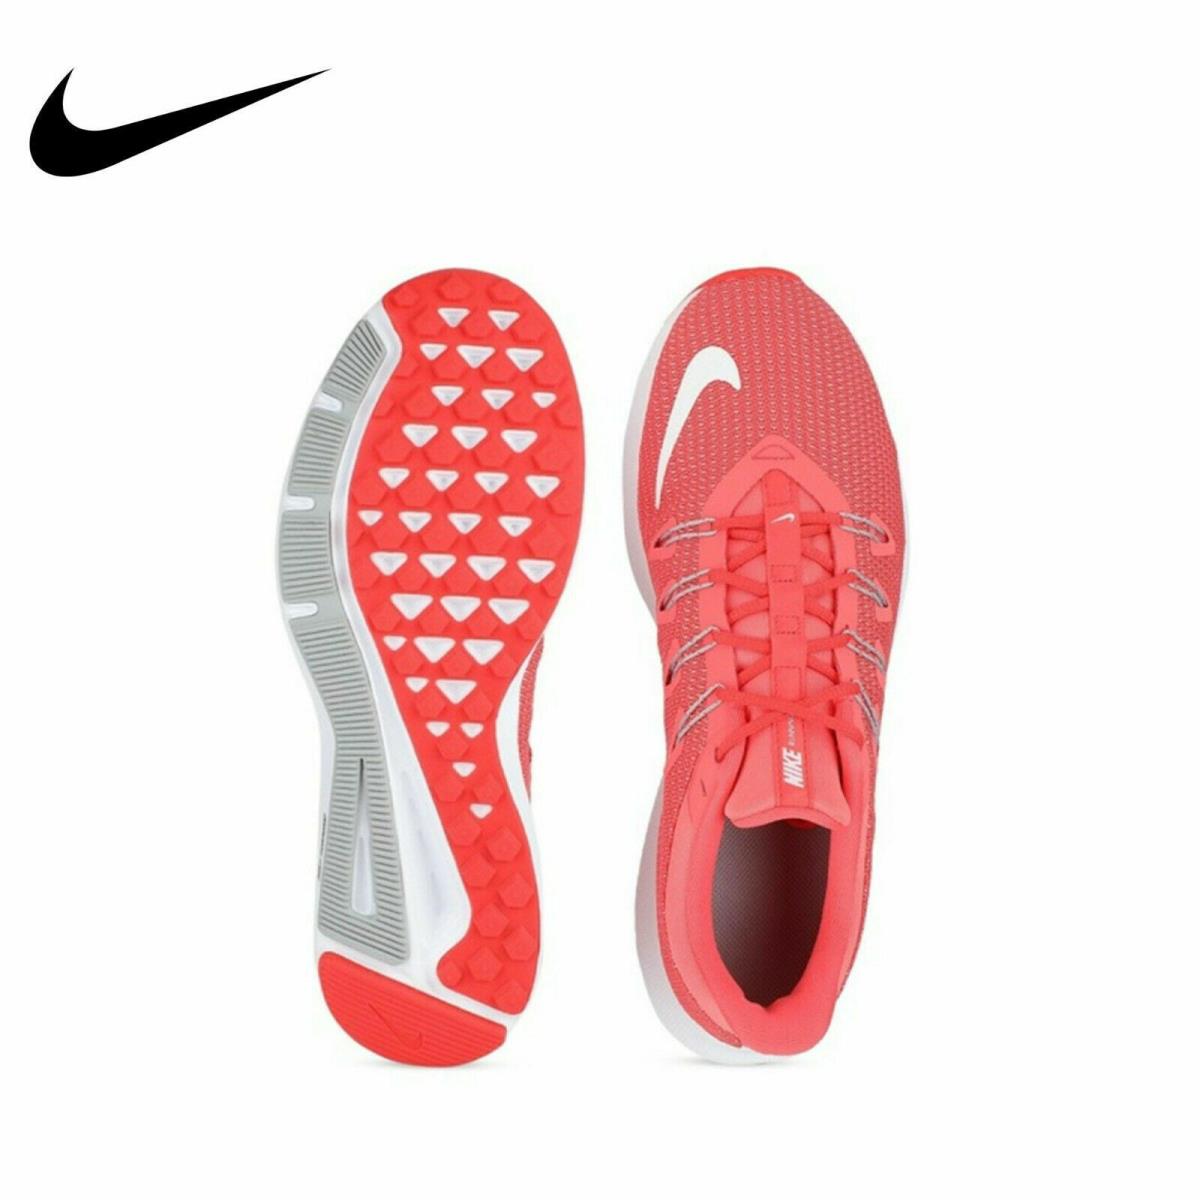 Nike shoes Quest - Red 2